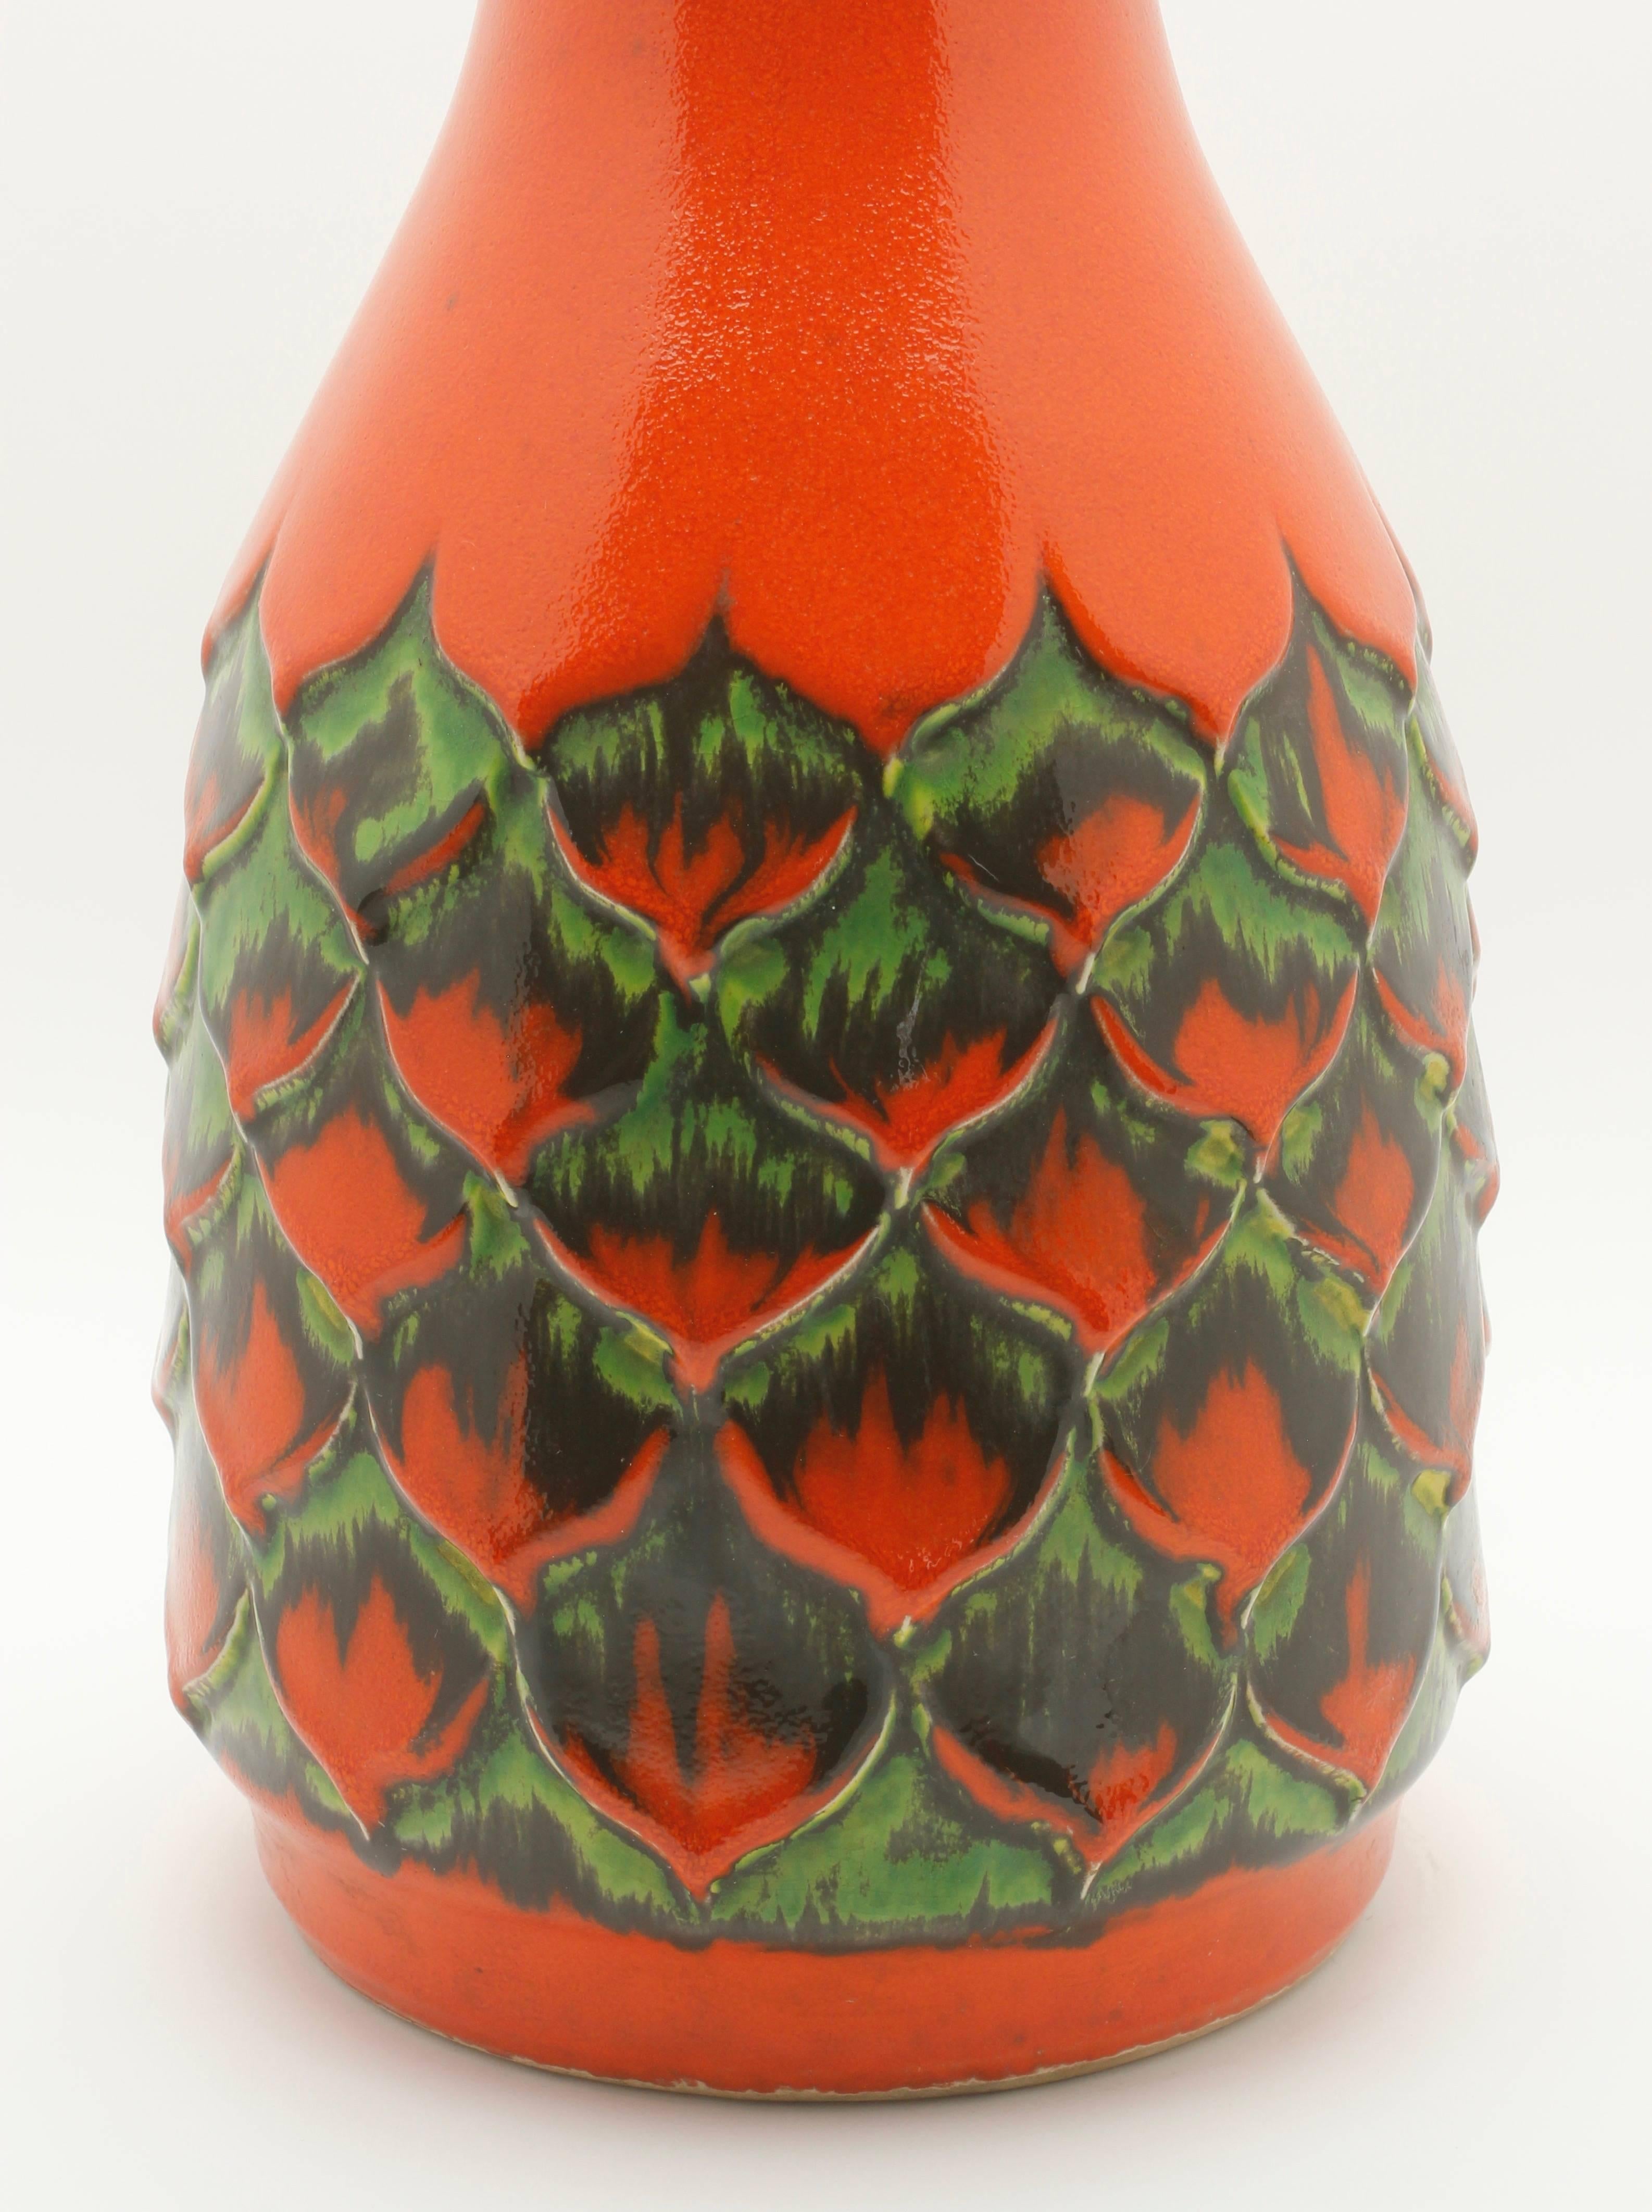 Vintage 1970s Jasba Keramik red pineapple vase W.German pottery fat lava.

The piece is in excellent condition and a real beauty!






 